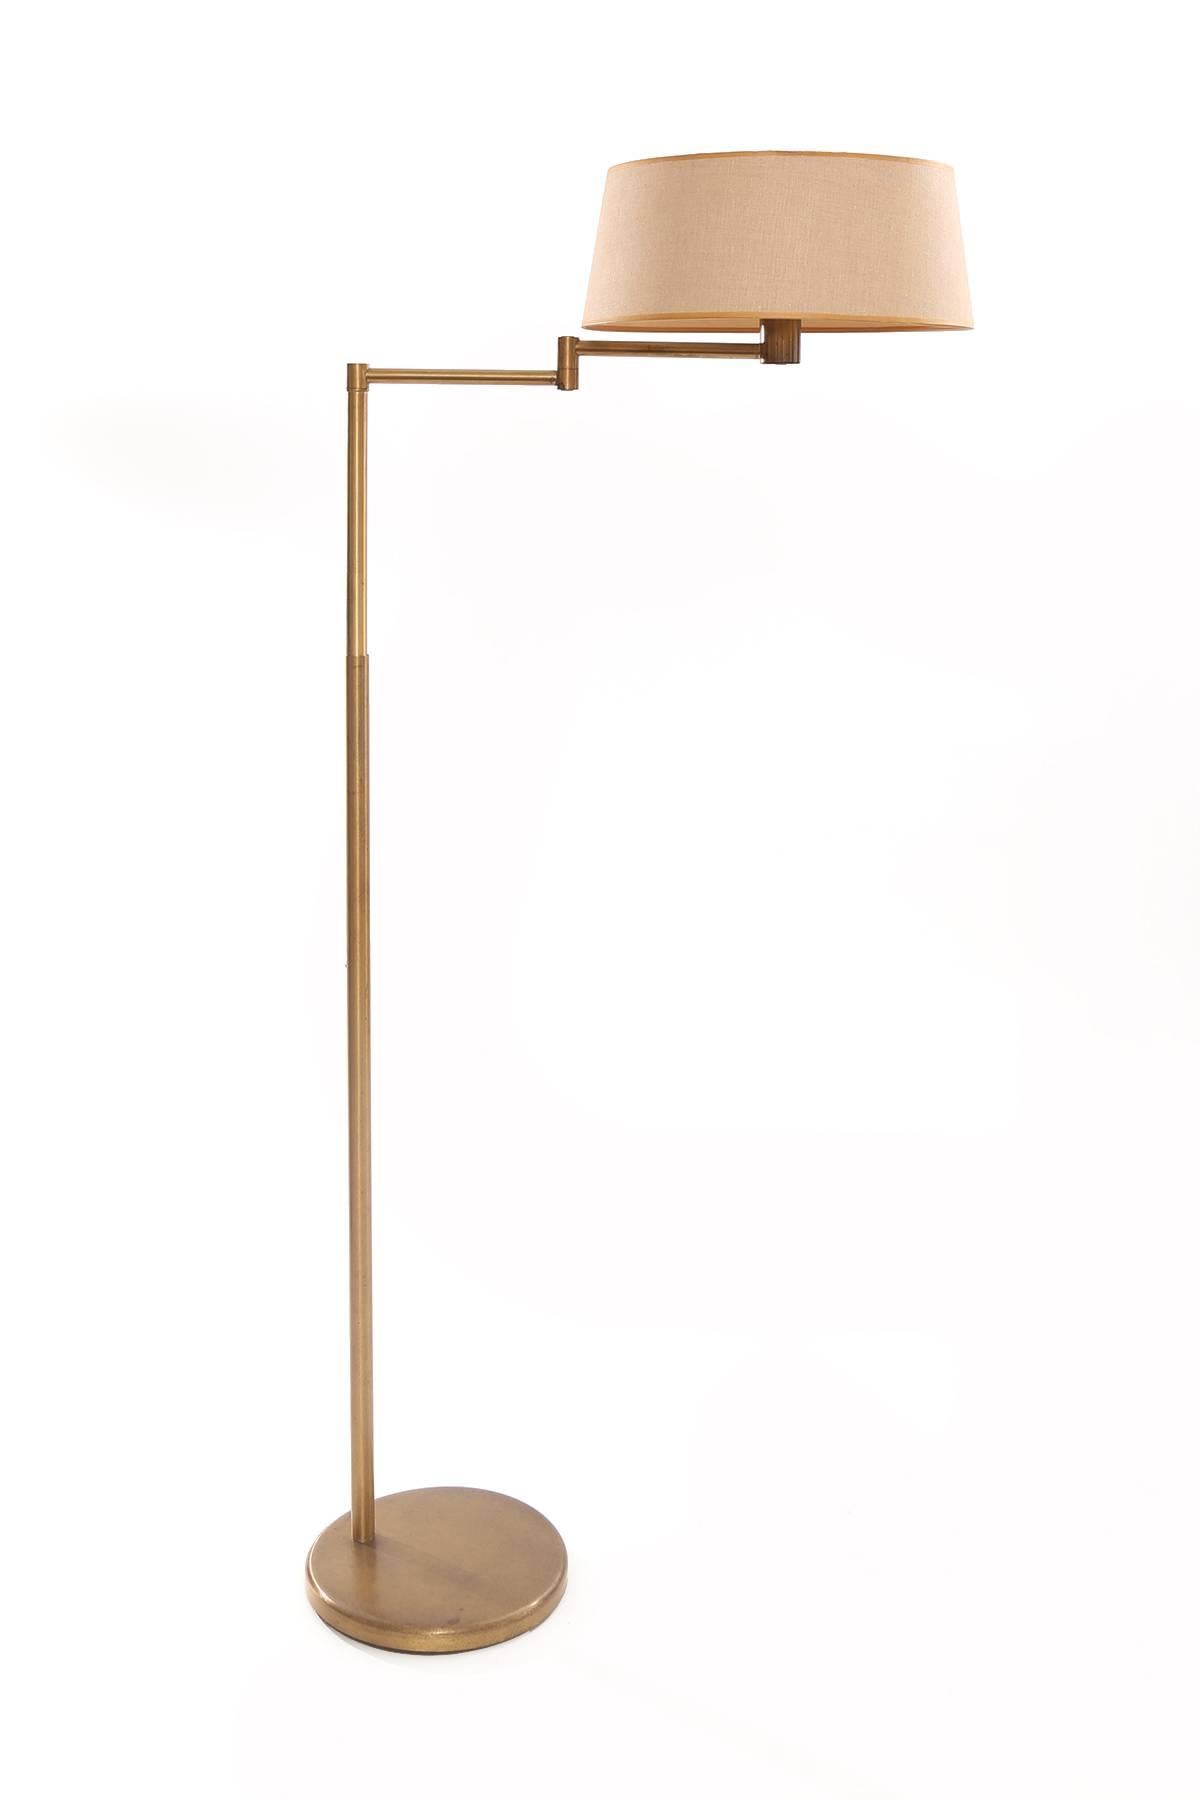 Von Nessen bronze floor lamp circa early 1960s. This example has a swing arm and its height is adjustable from 48